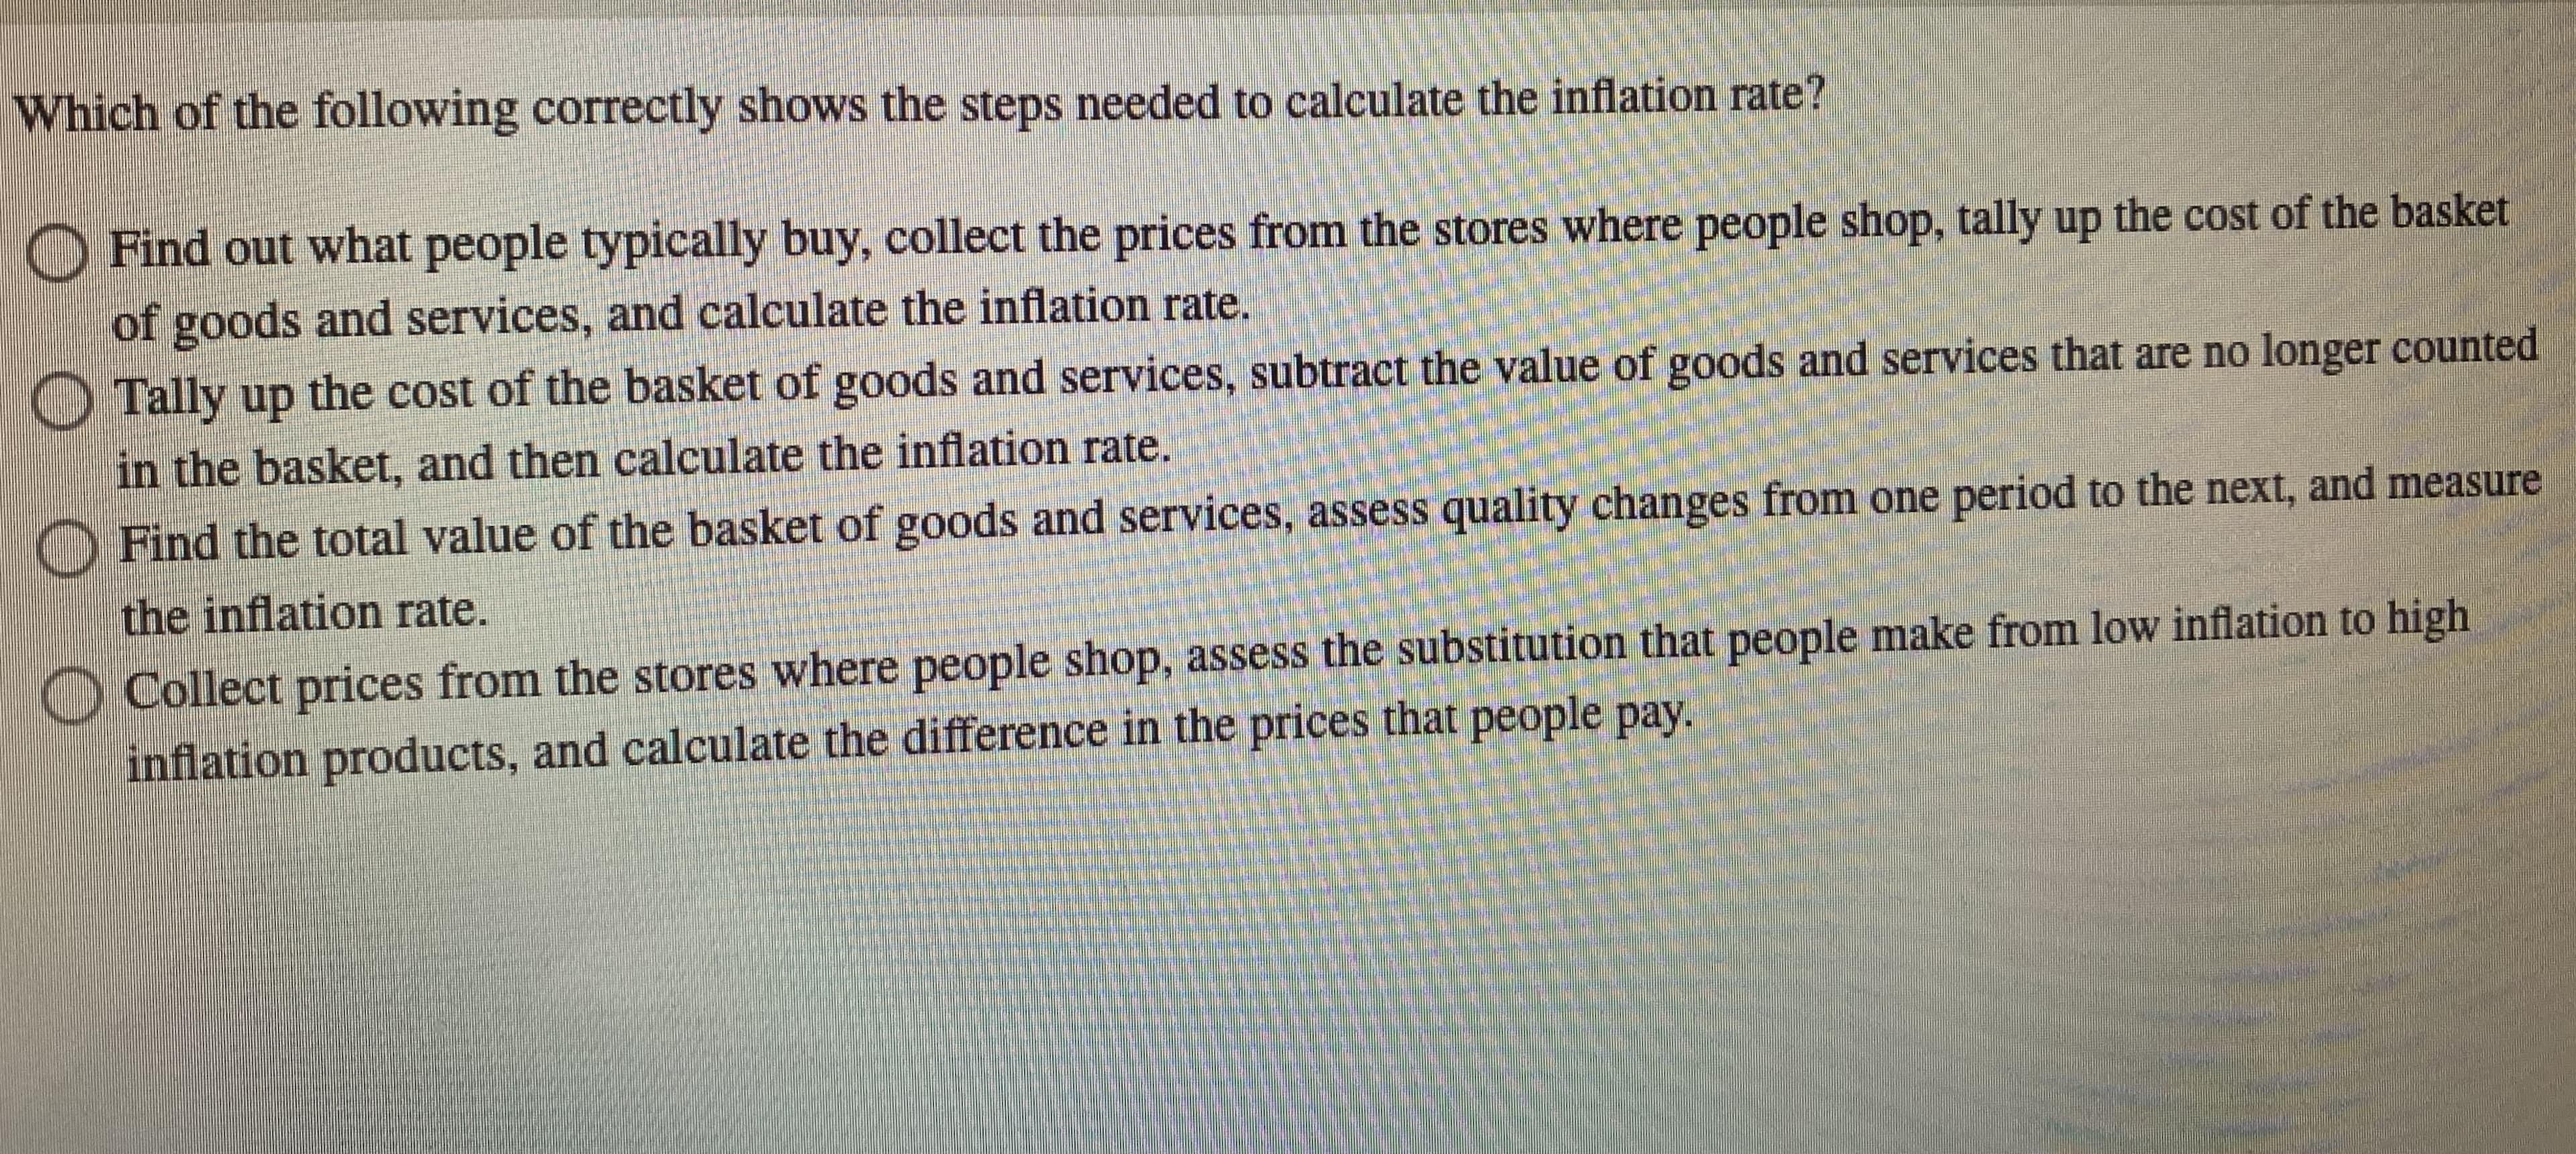 Which of the following correctly shows the steps needed to calculate the inflation rate?
